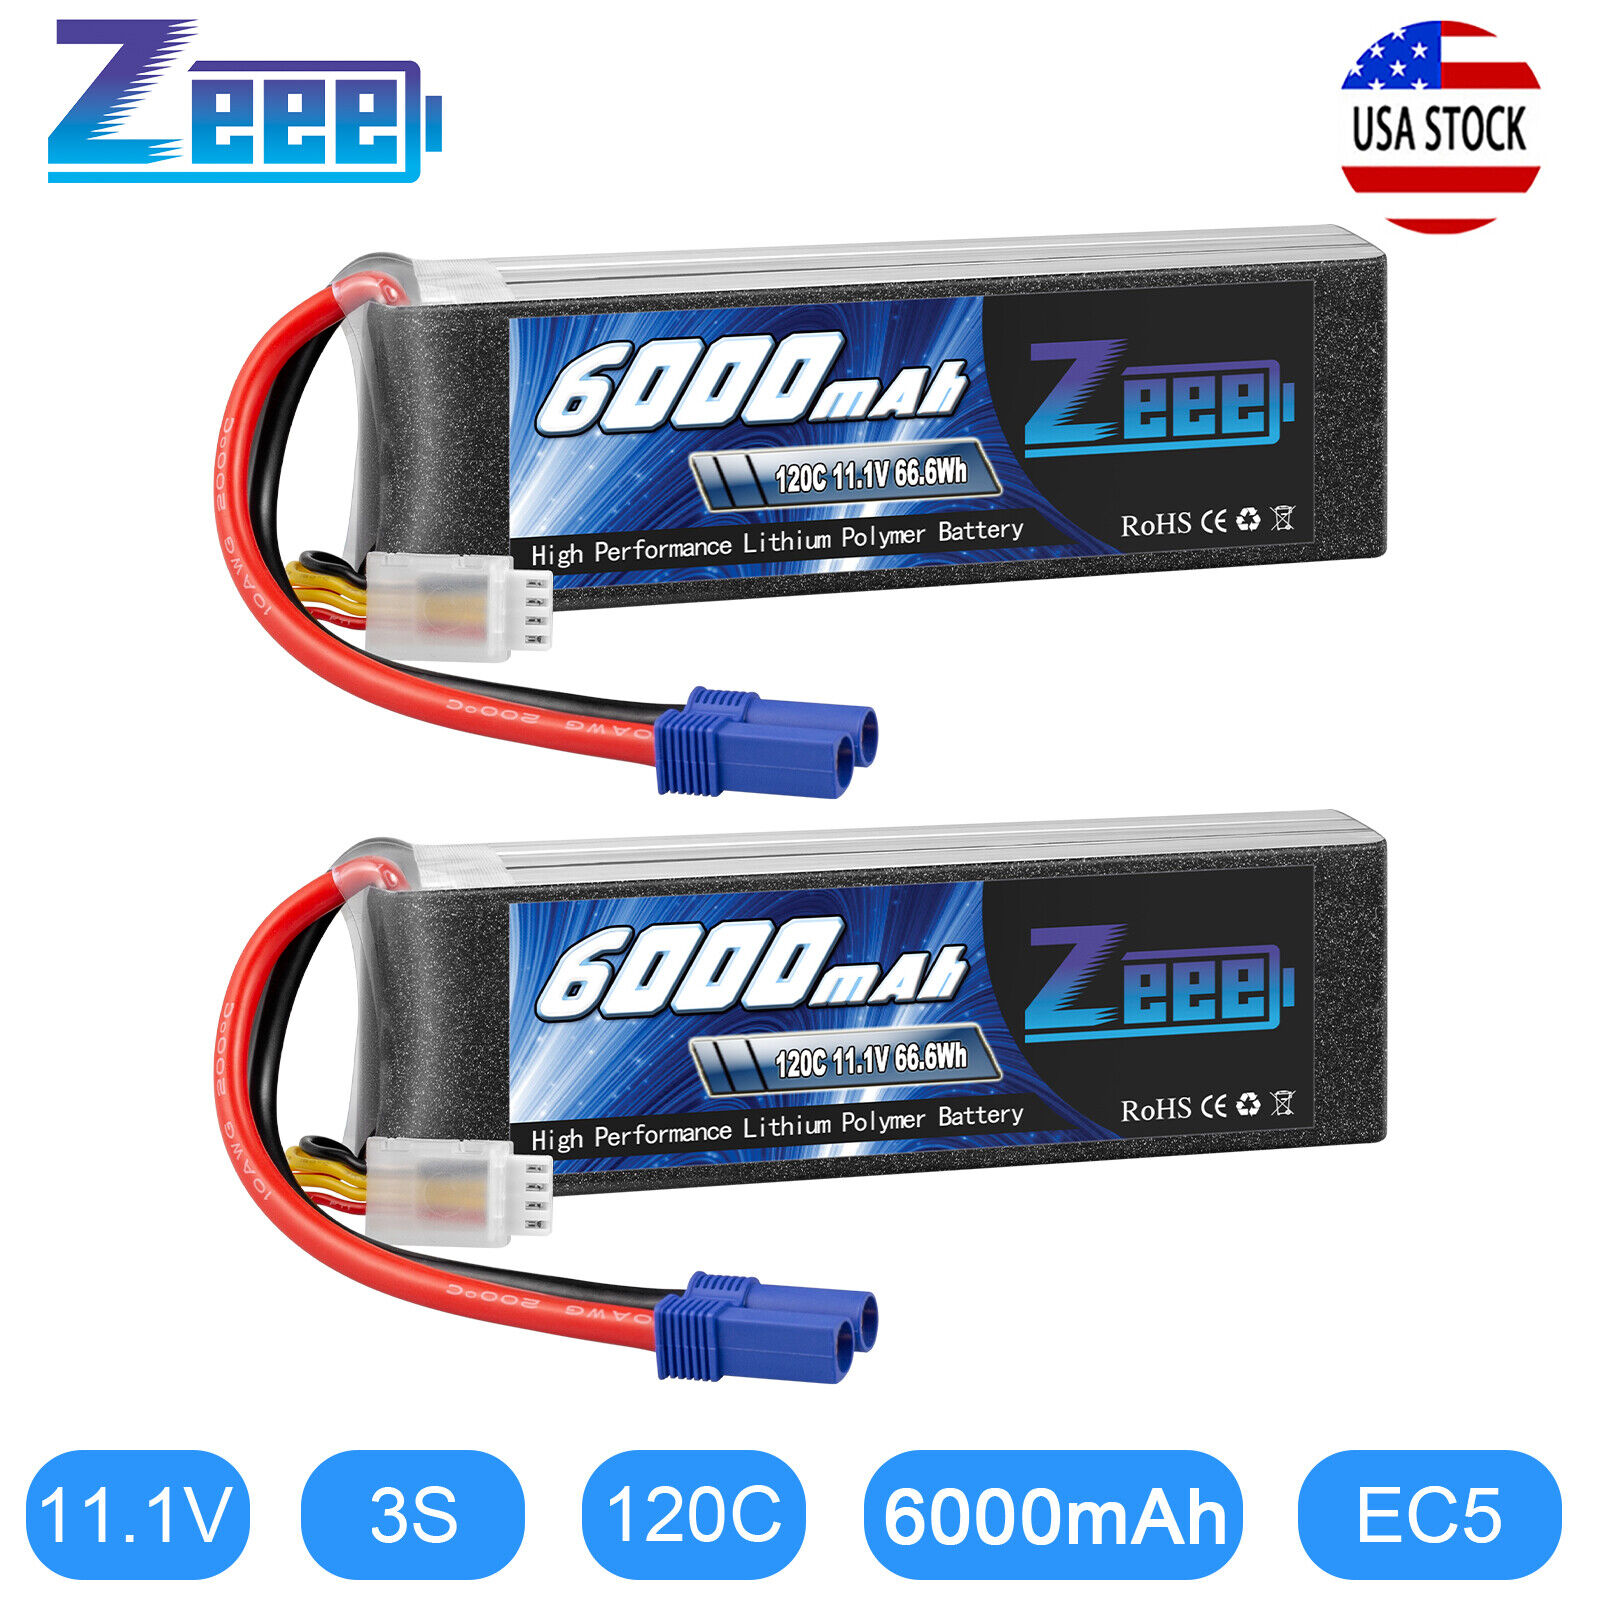 2x Zeee 11.1V 120C 6000mAh EC5 3S LiPo Battery for RC Car Helicopter Quadcopter ZEEE Does Not Apply